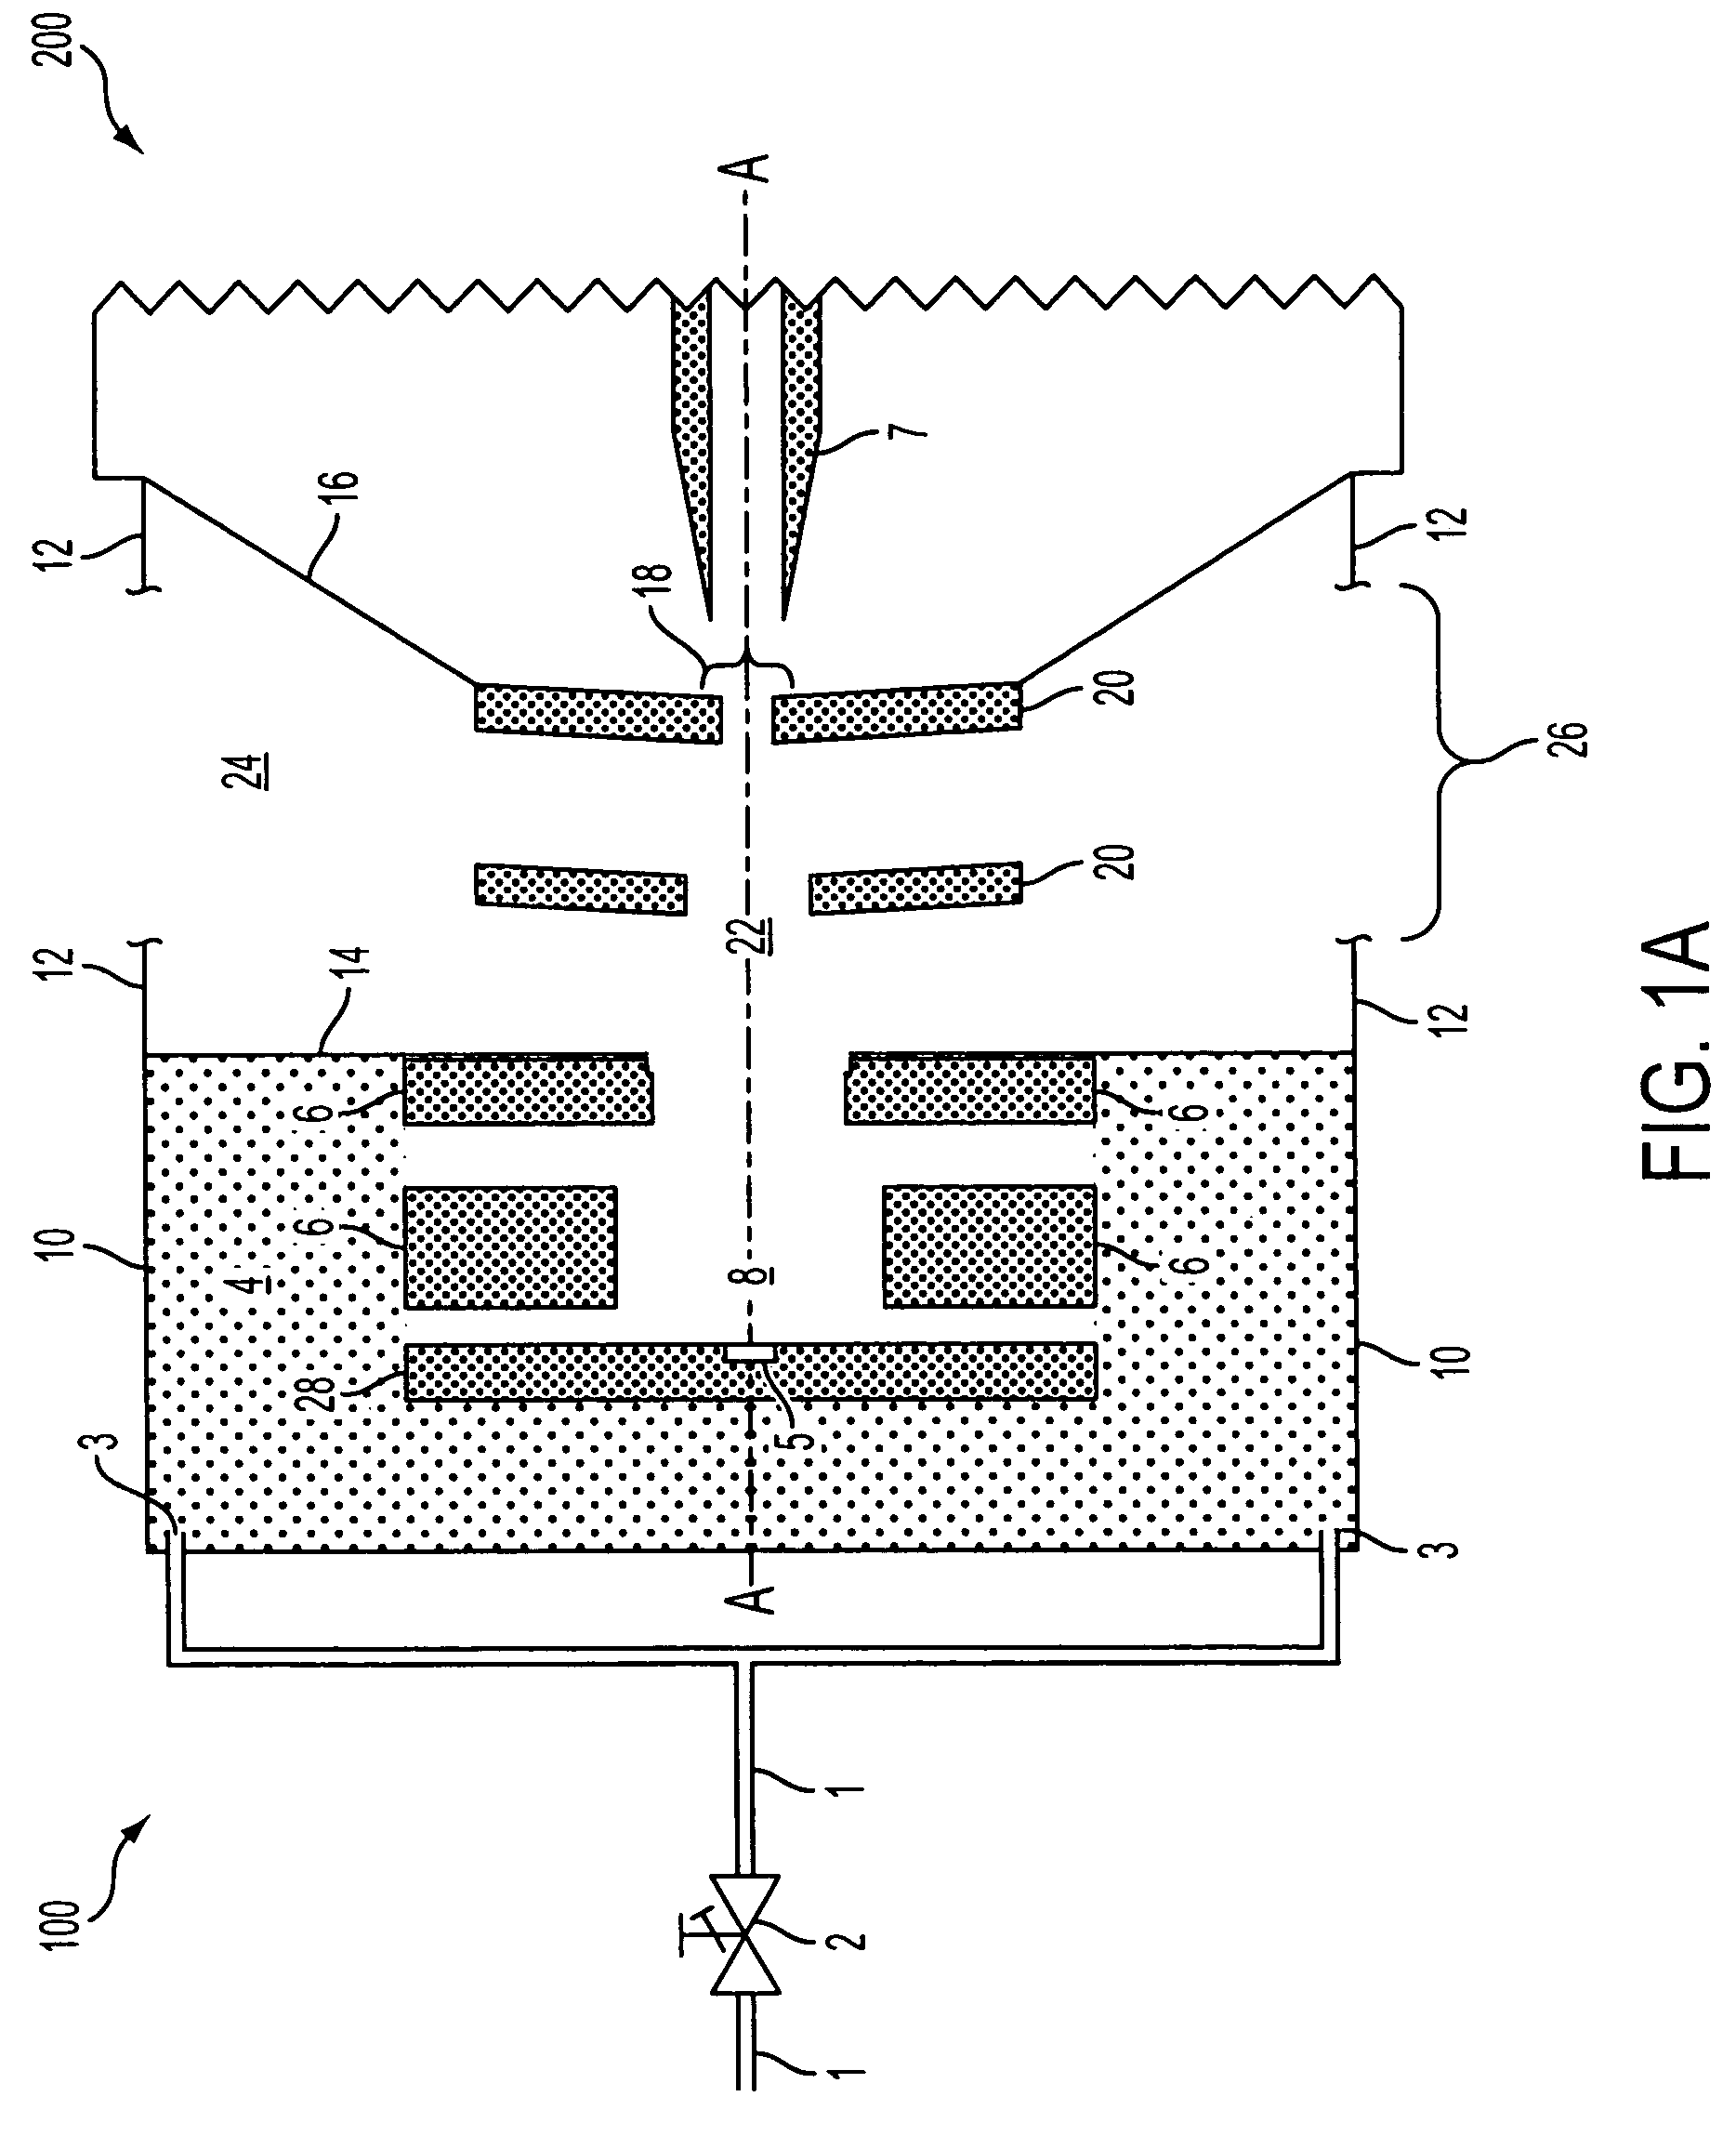 Methods and apparatus for ion sources, ion control and ion measurement for macromolecules